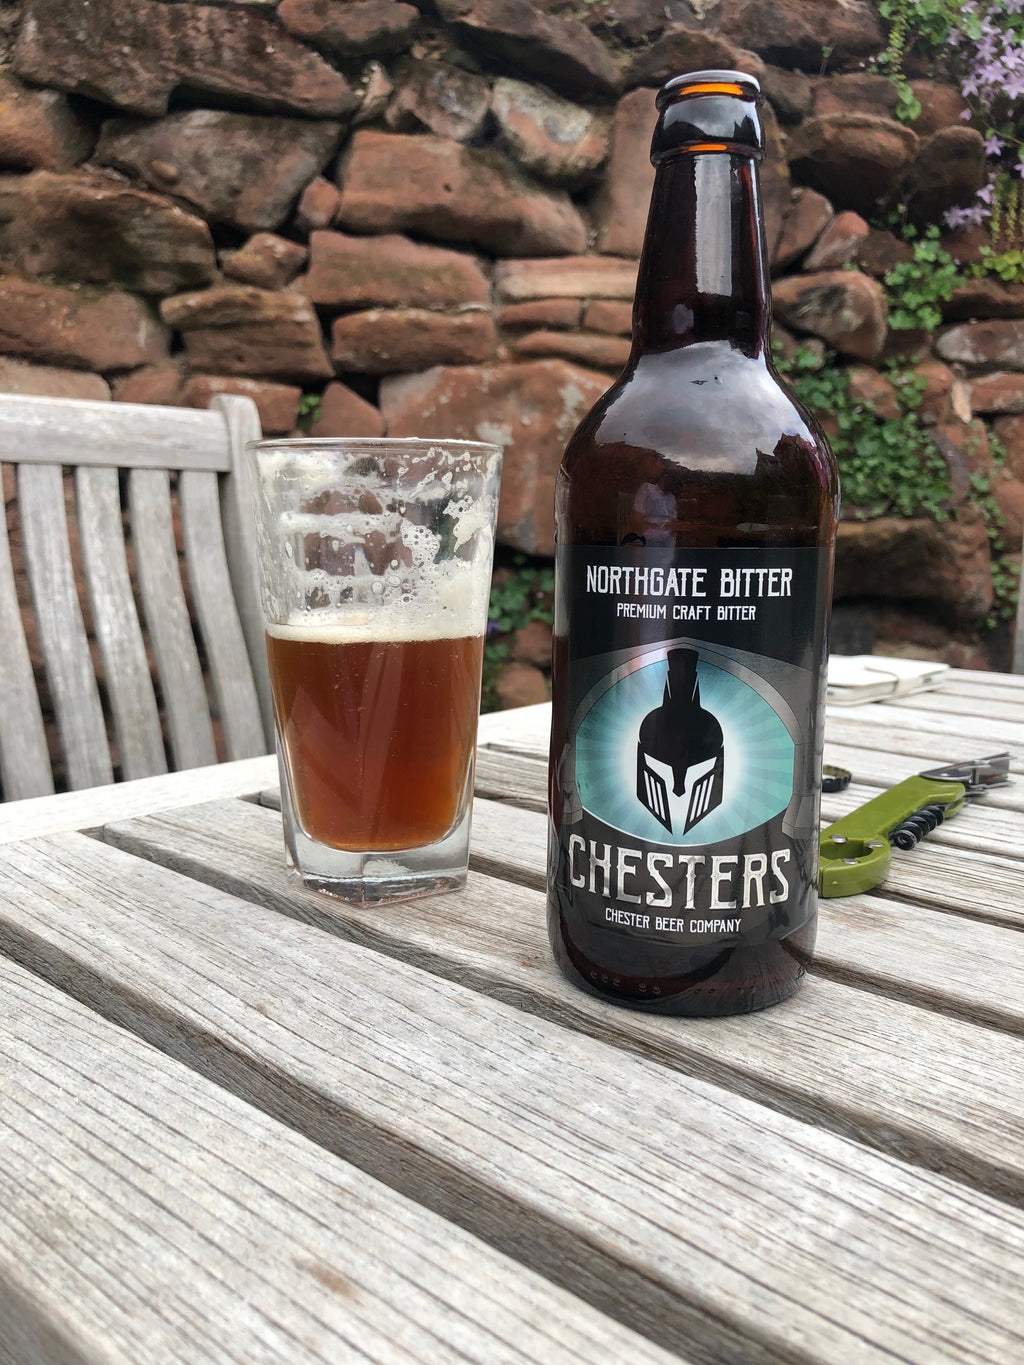 Northgate Bitter by Chester Beer